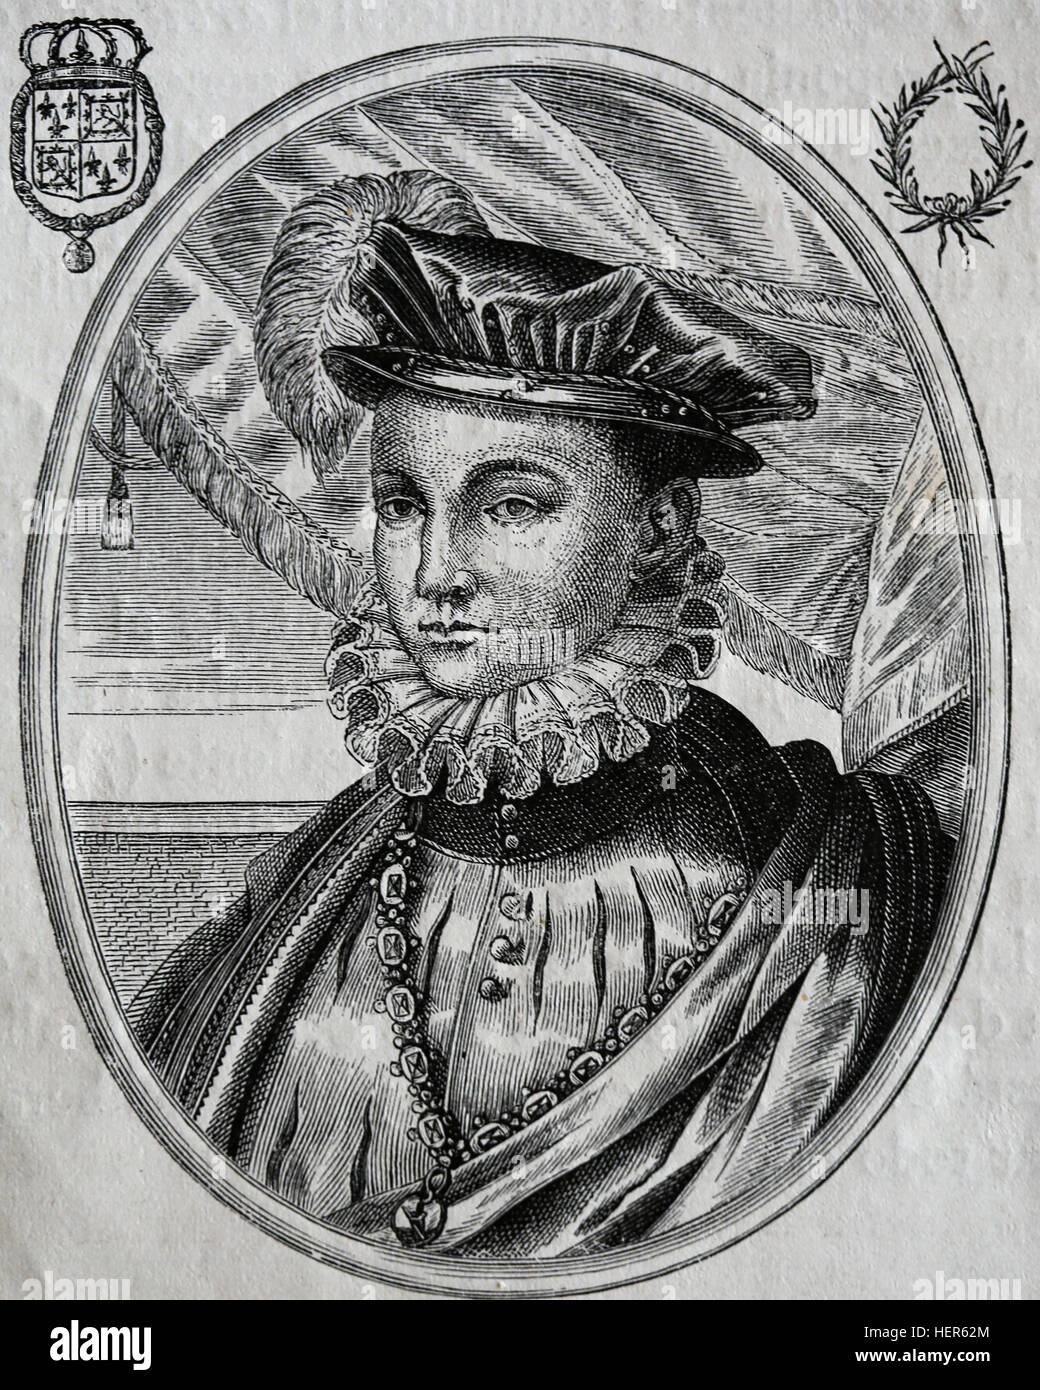 Francis II (1544-1560). King of France from 1559-1560. House of Valois-Angouleme. Engraving, 1884. Stock Photo